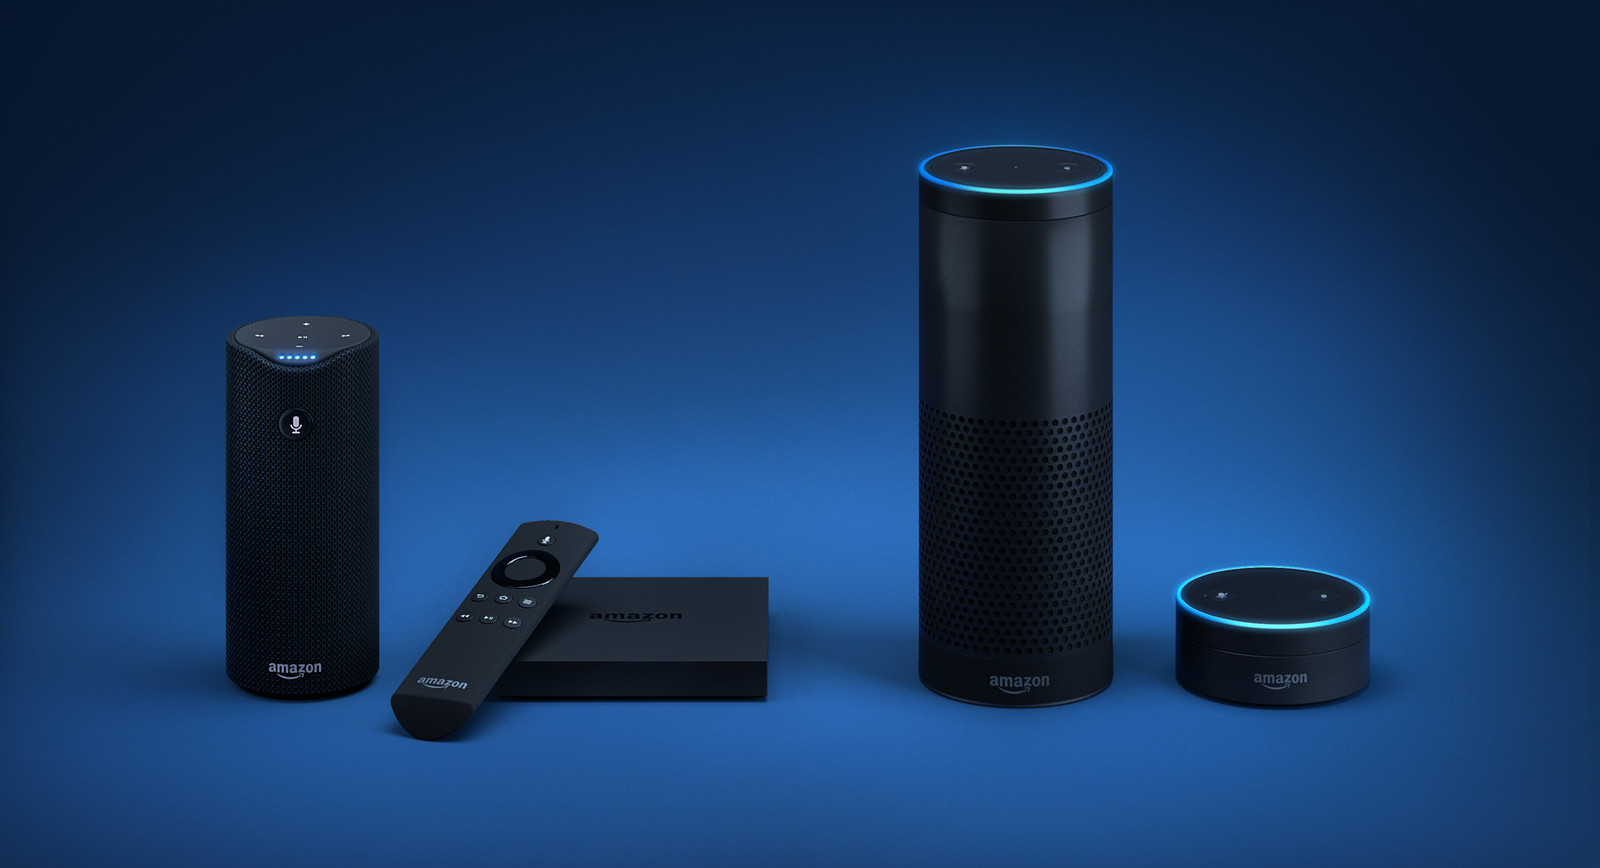 Amazon have sold over 5 million Echo home speakers in just two years